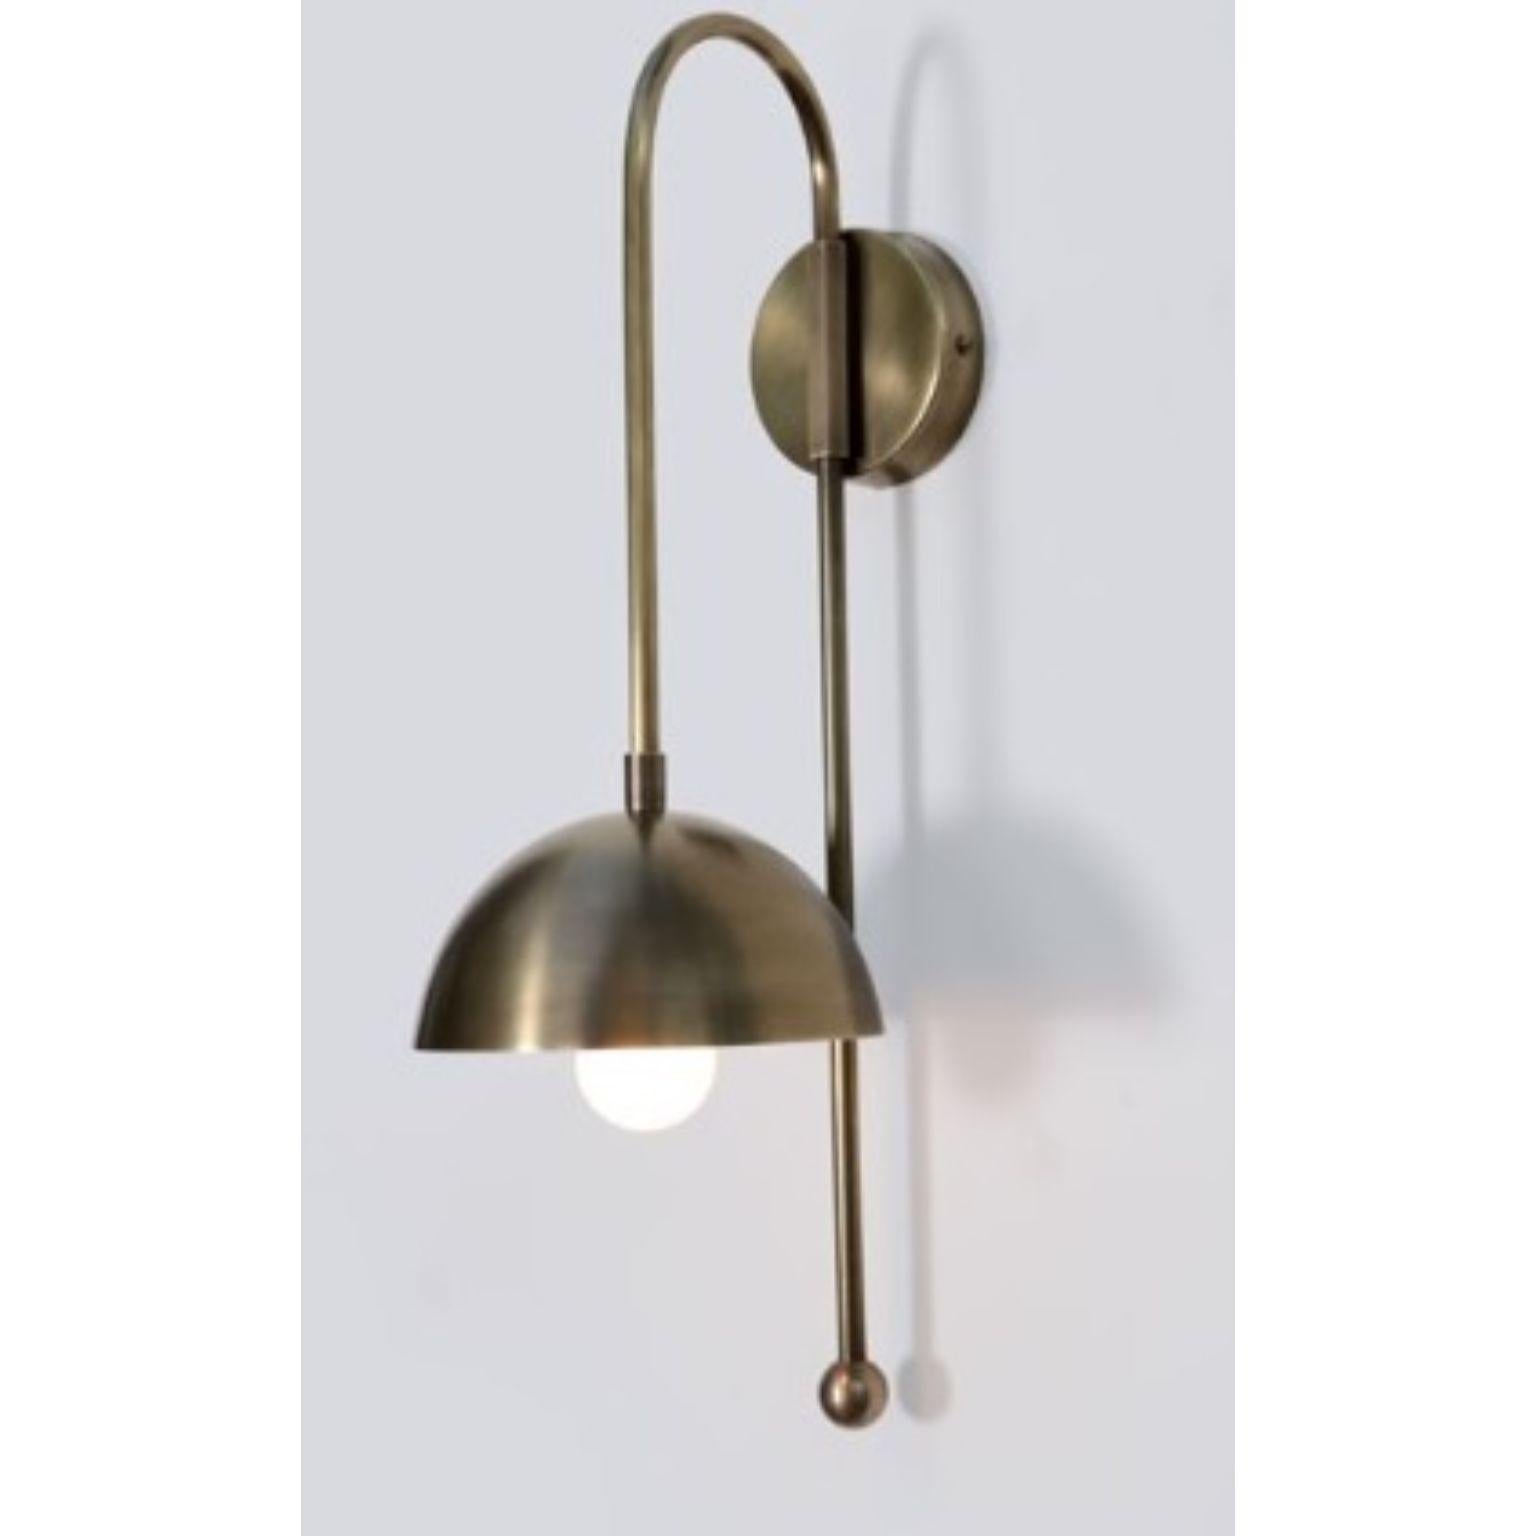 A Brass Dome Wall Sconce by Lamp Shaper
Dimensions: D 15.5 x W 22 x H 48.5 cm.
Materials: Brass.

Different finishes available: raw brass, aged brass, burnt brass and brushed brass Please contact us.

All our lamps can be wired according to each